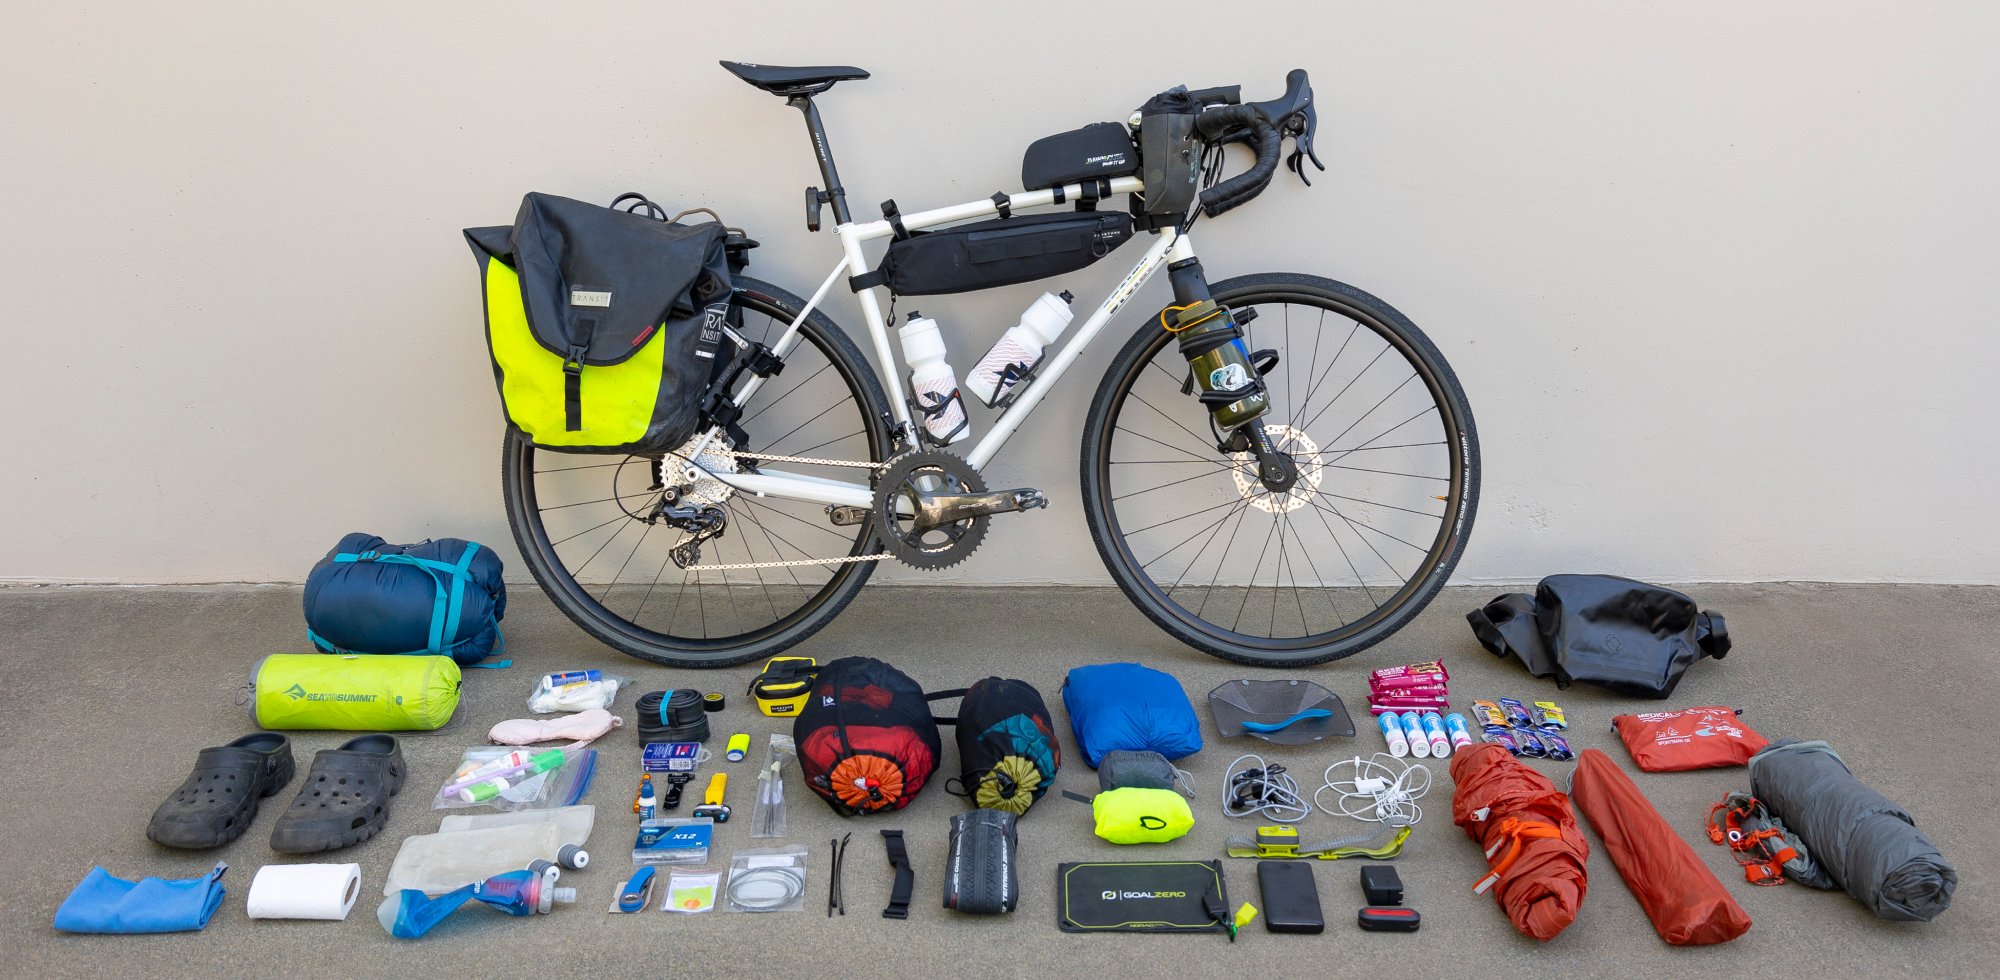 BIKEPACKING GEAR CHECKLIST - Gravel bike with camping gear layed out on the ground